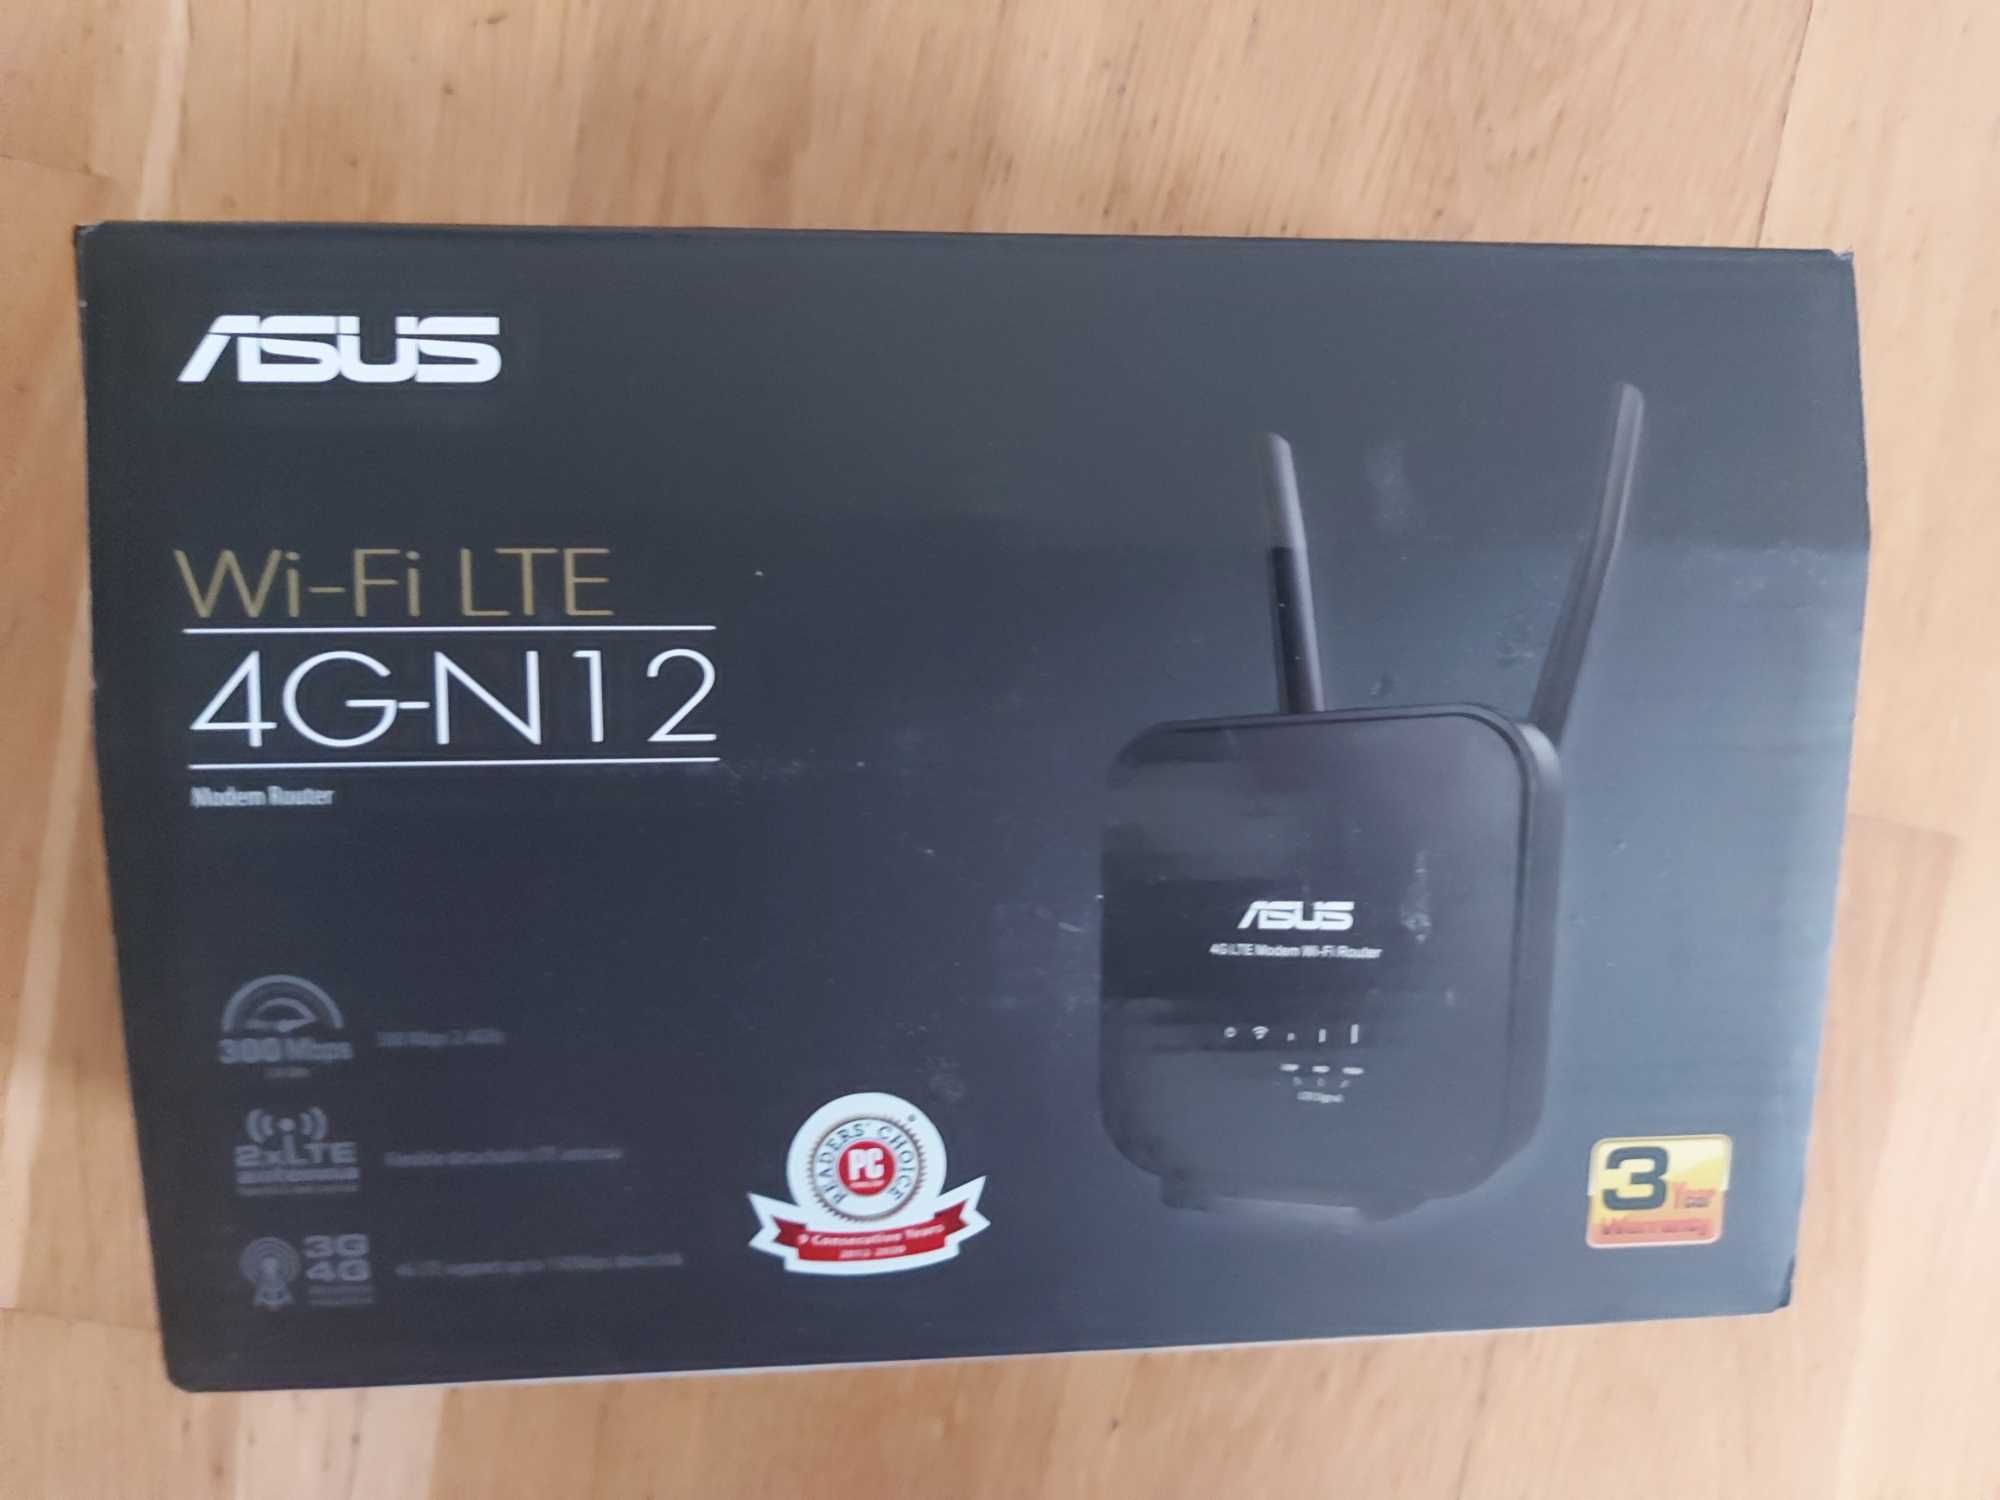 Modem Router Asus WI-FI LTE 4G-N12 300 Mbbs 2.4GHz